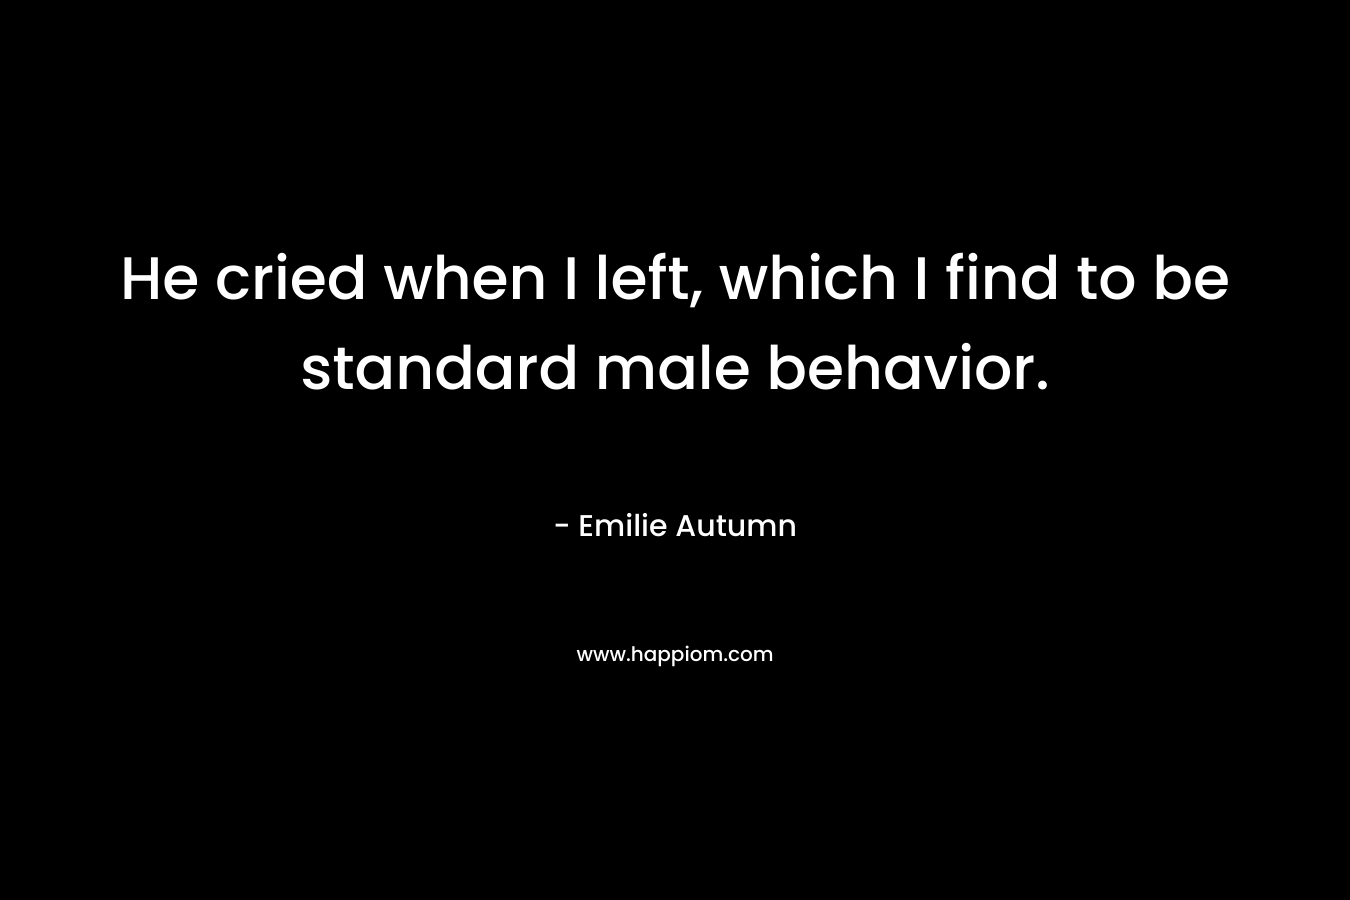 He cried when I left, which I find to be standard male behavior. – Emilie Autumn